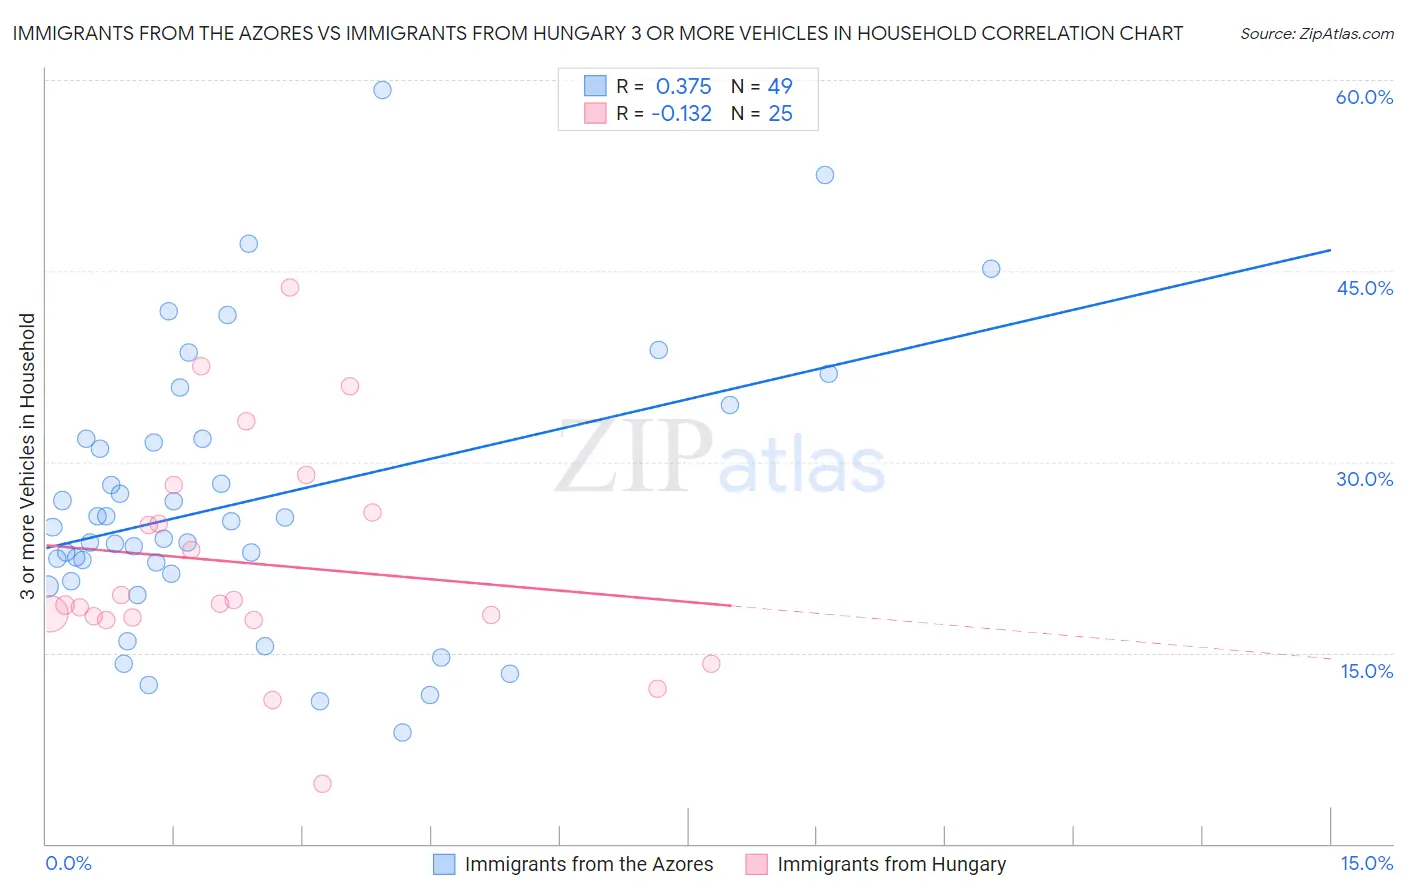 Immigrants from the Azores vs Immigrants from Hungary 3 or more Vehicles in Household